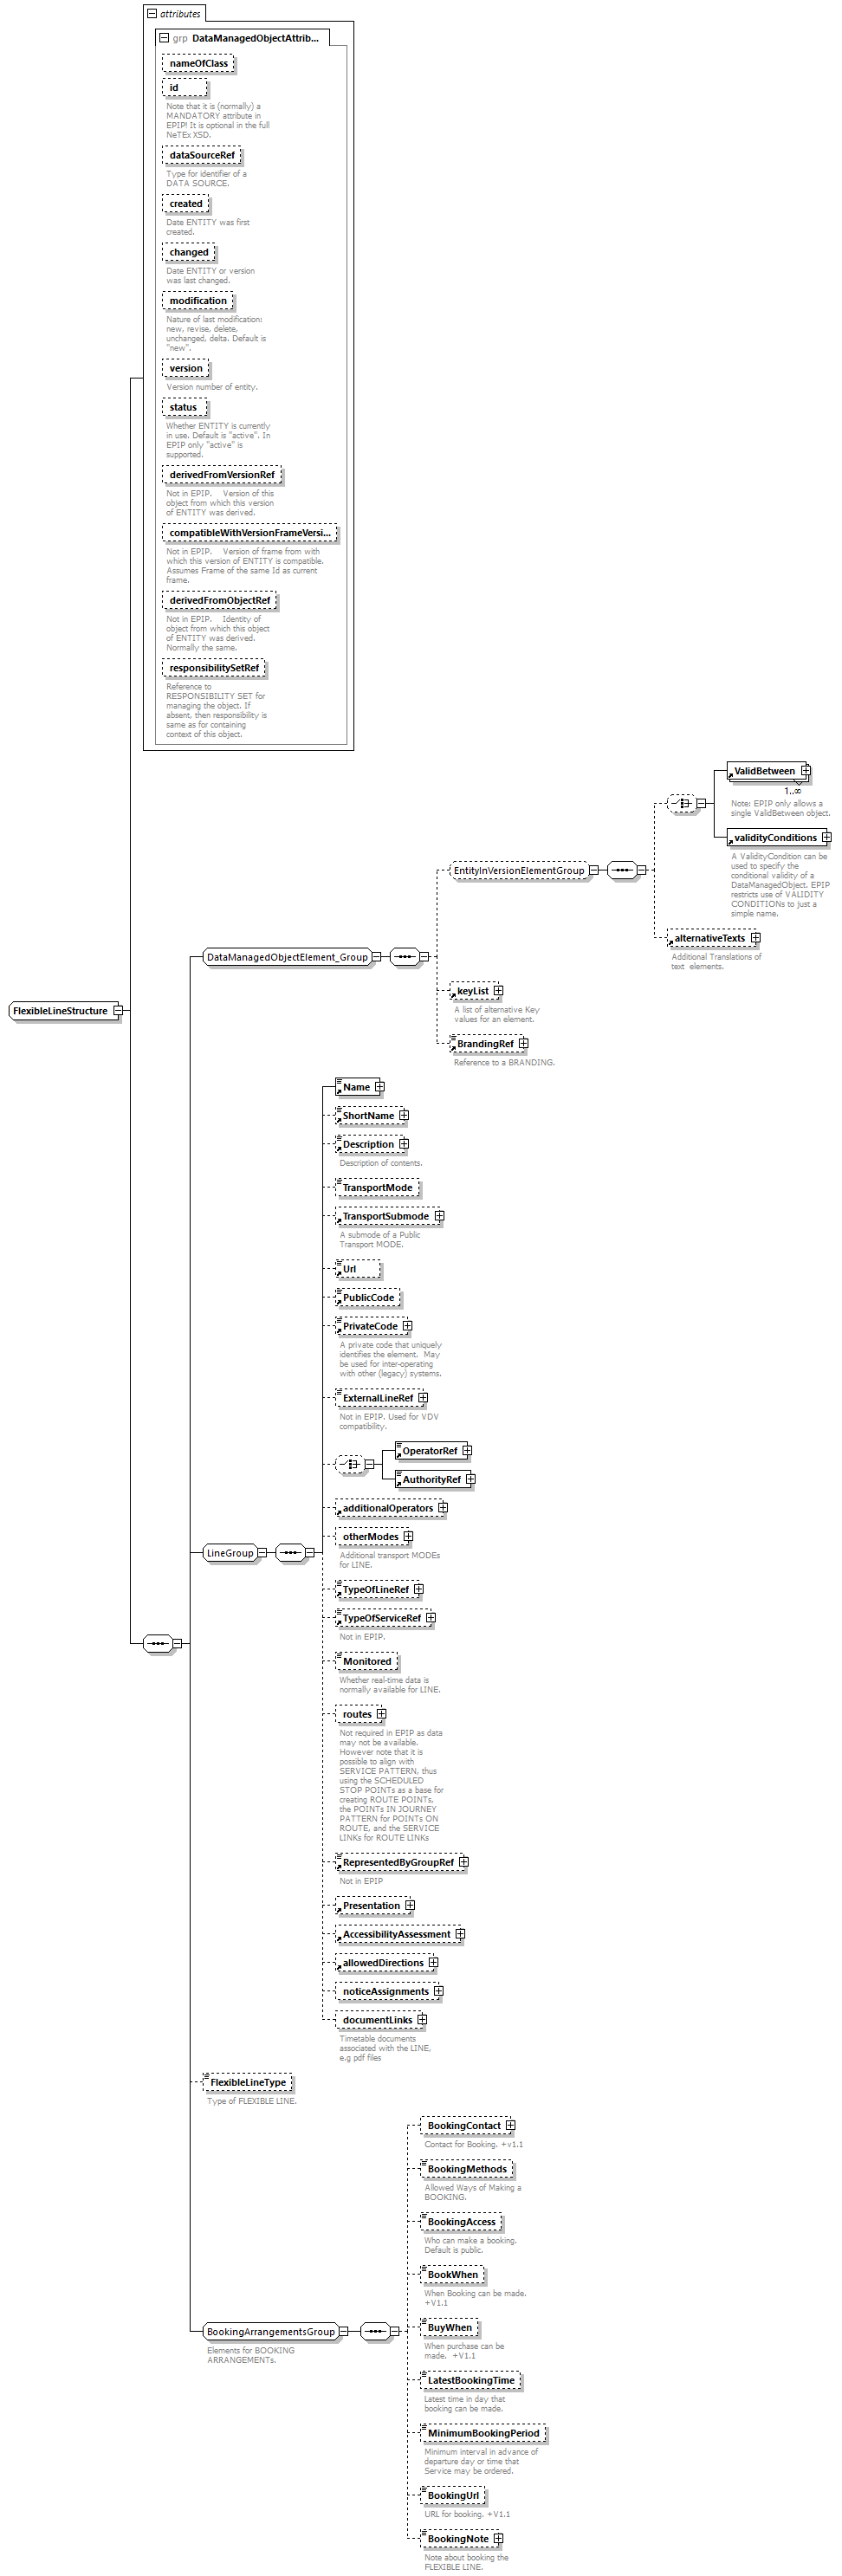 reduced_diagrams/reduced_p1107.png